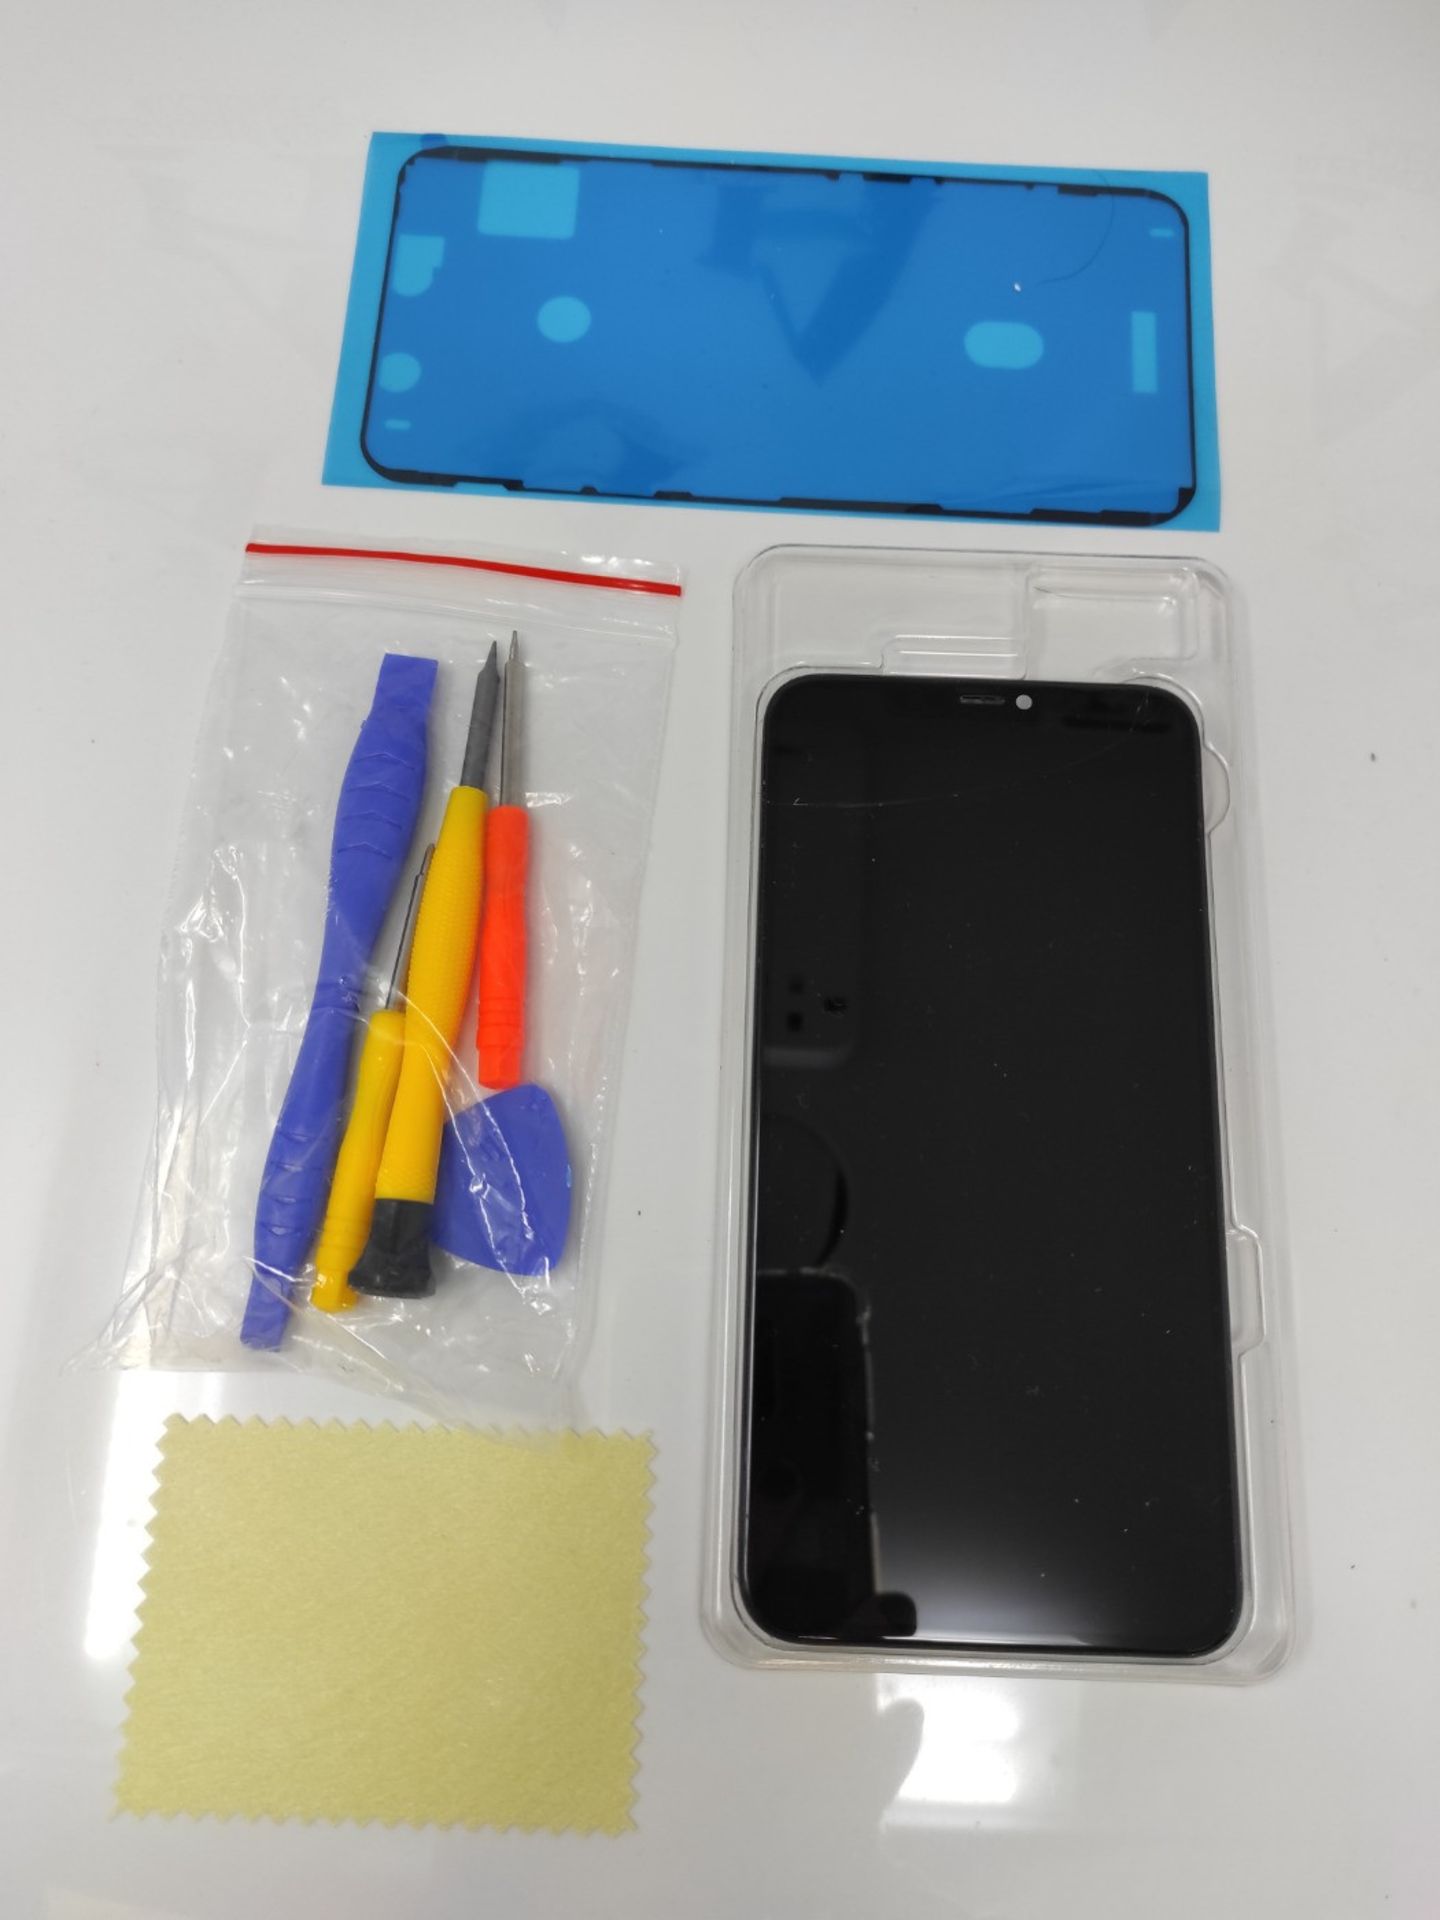 Yodoit for iPhone 11 Pro Max LCD Screen Replacement 6.5" Display Digitizer Glass Touch